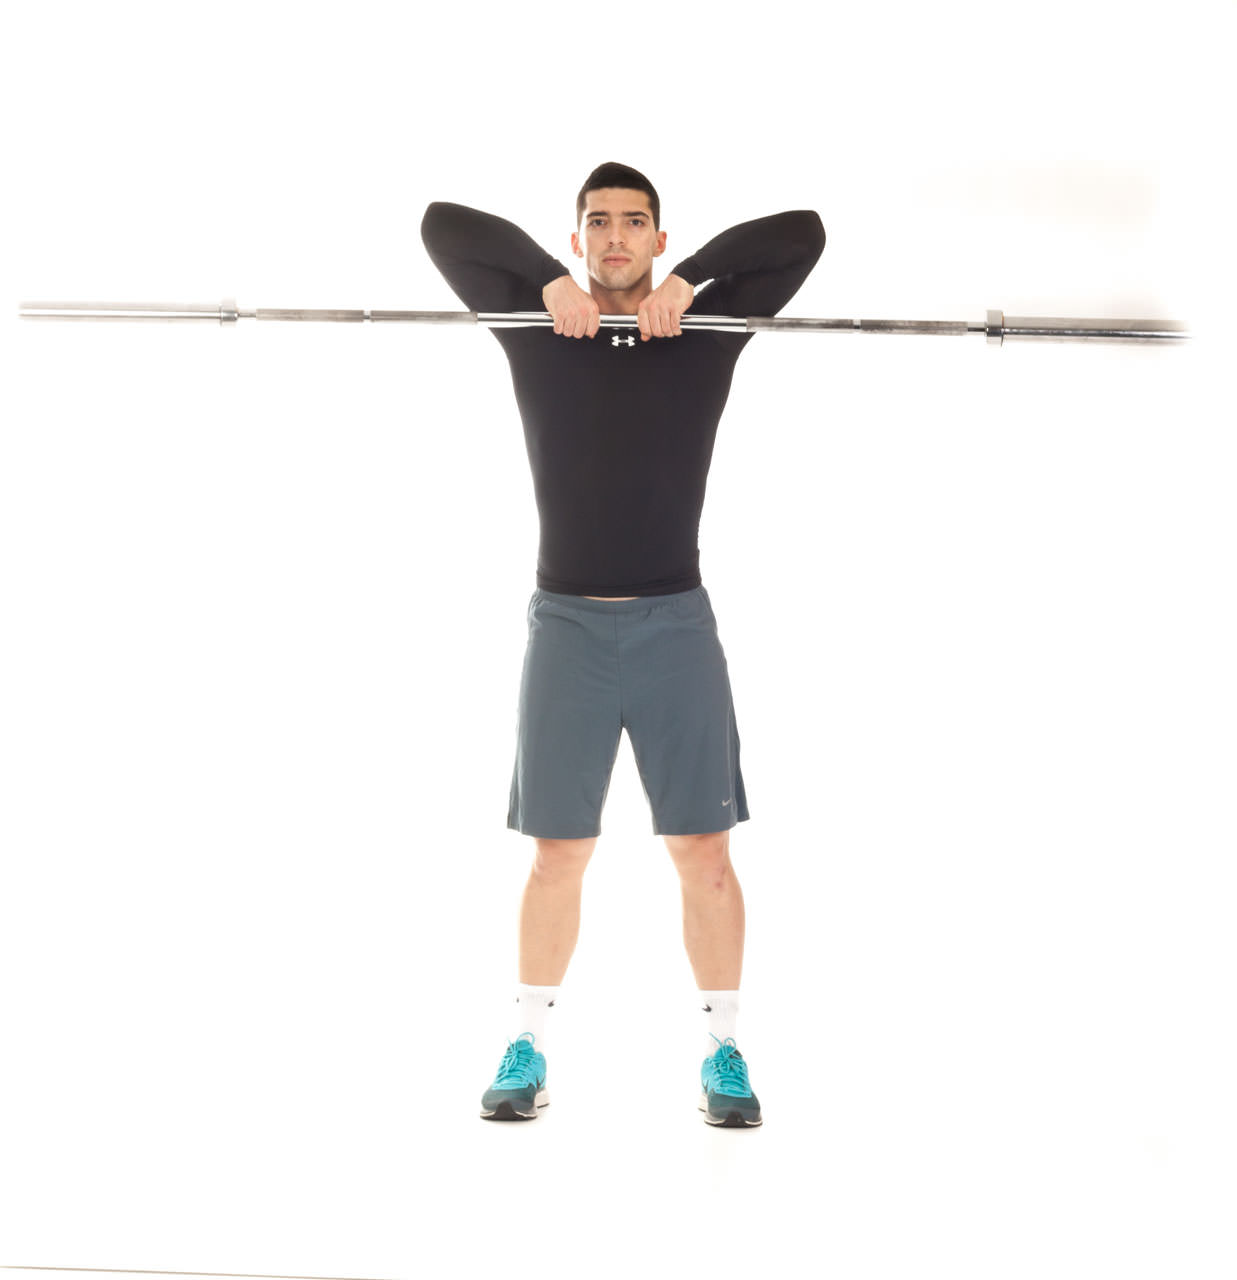 Close-Grip Upright Barbell Row frame #2